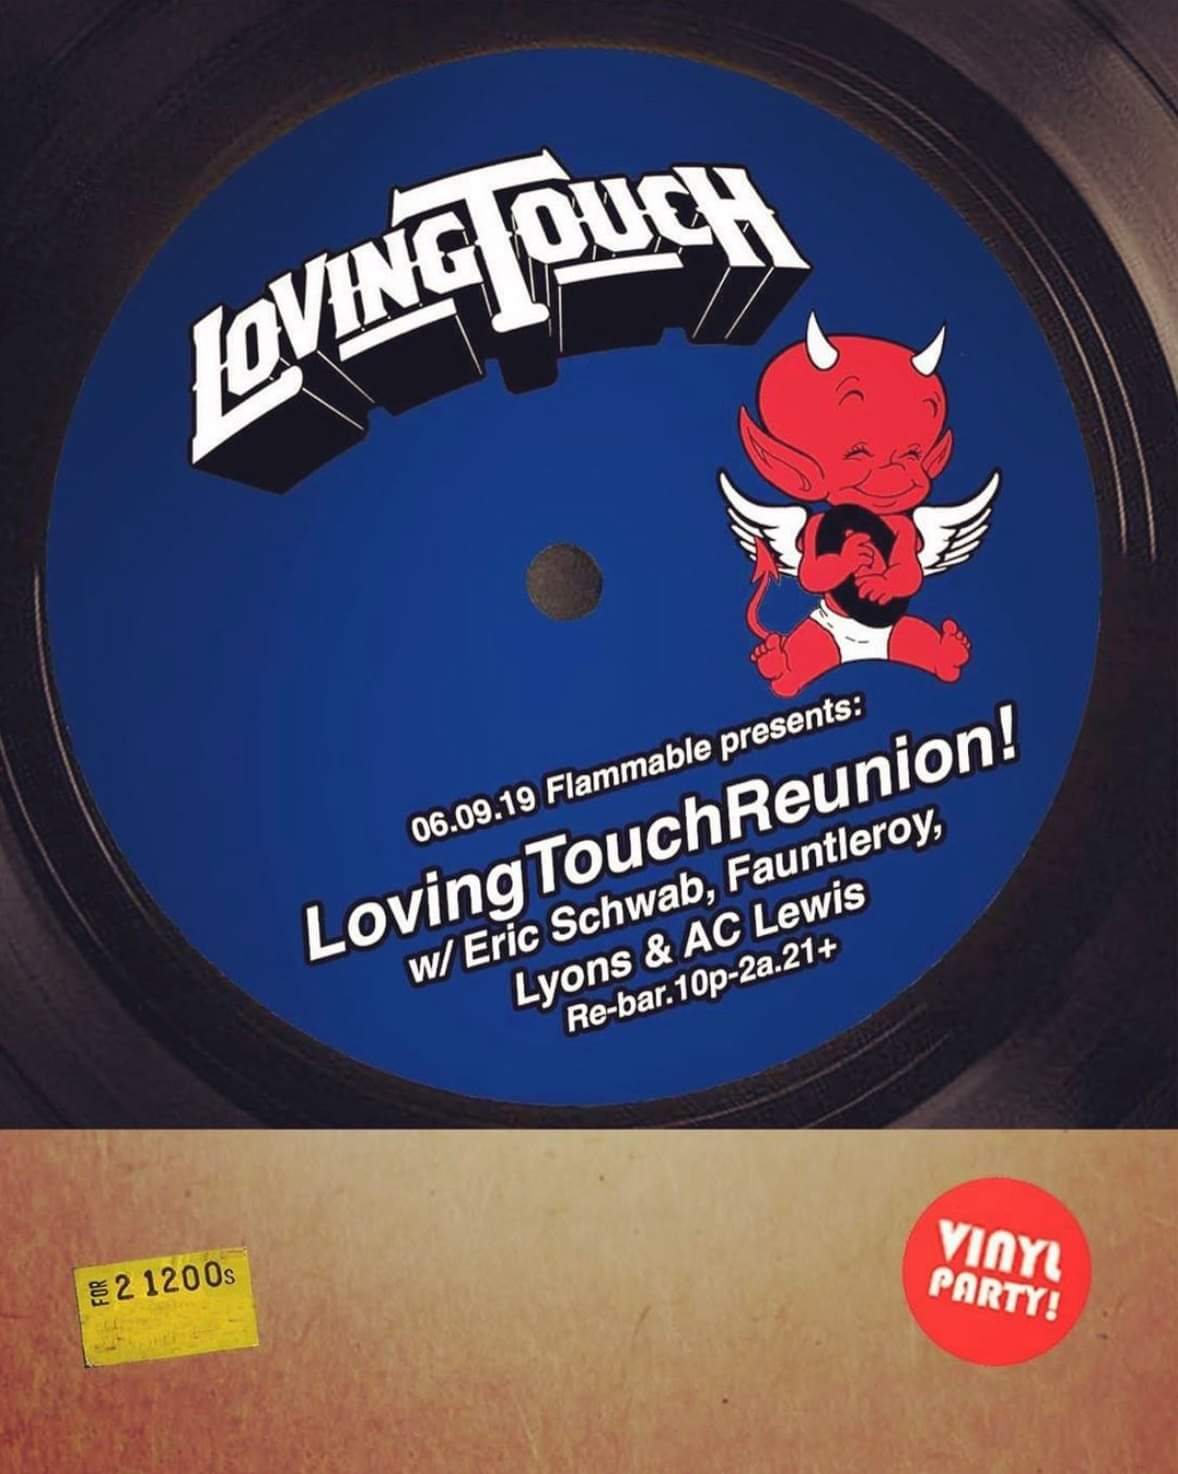 Flammable presents: Loving Touch Residents at Re-Bar, Seattle